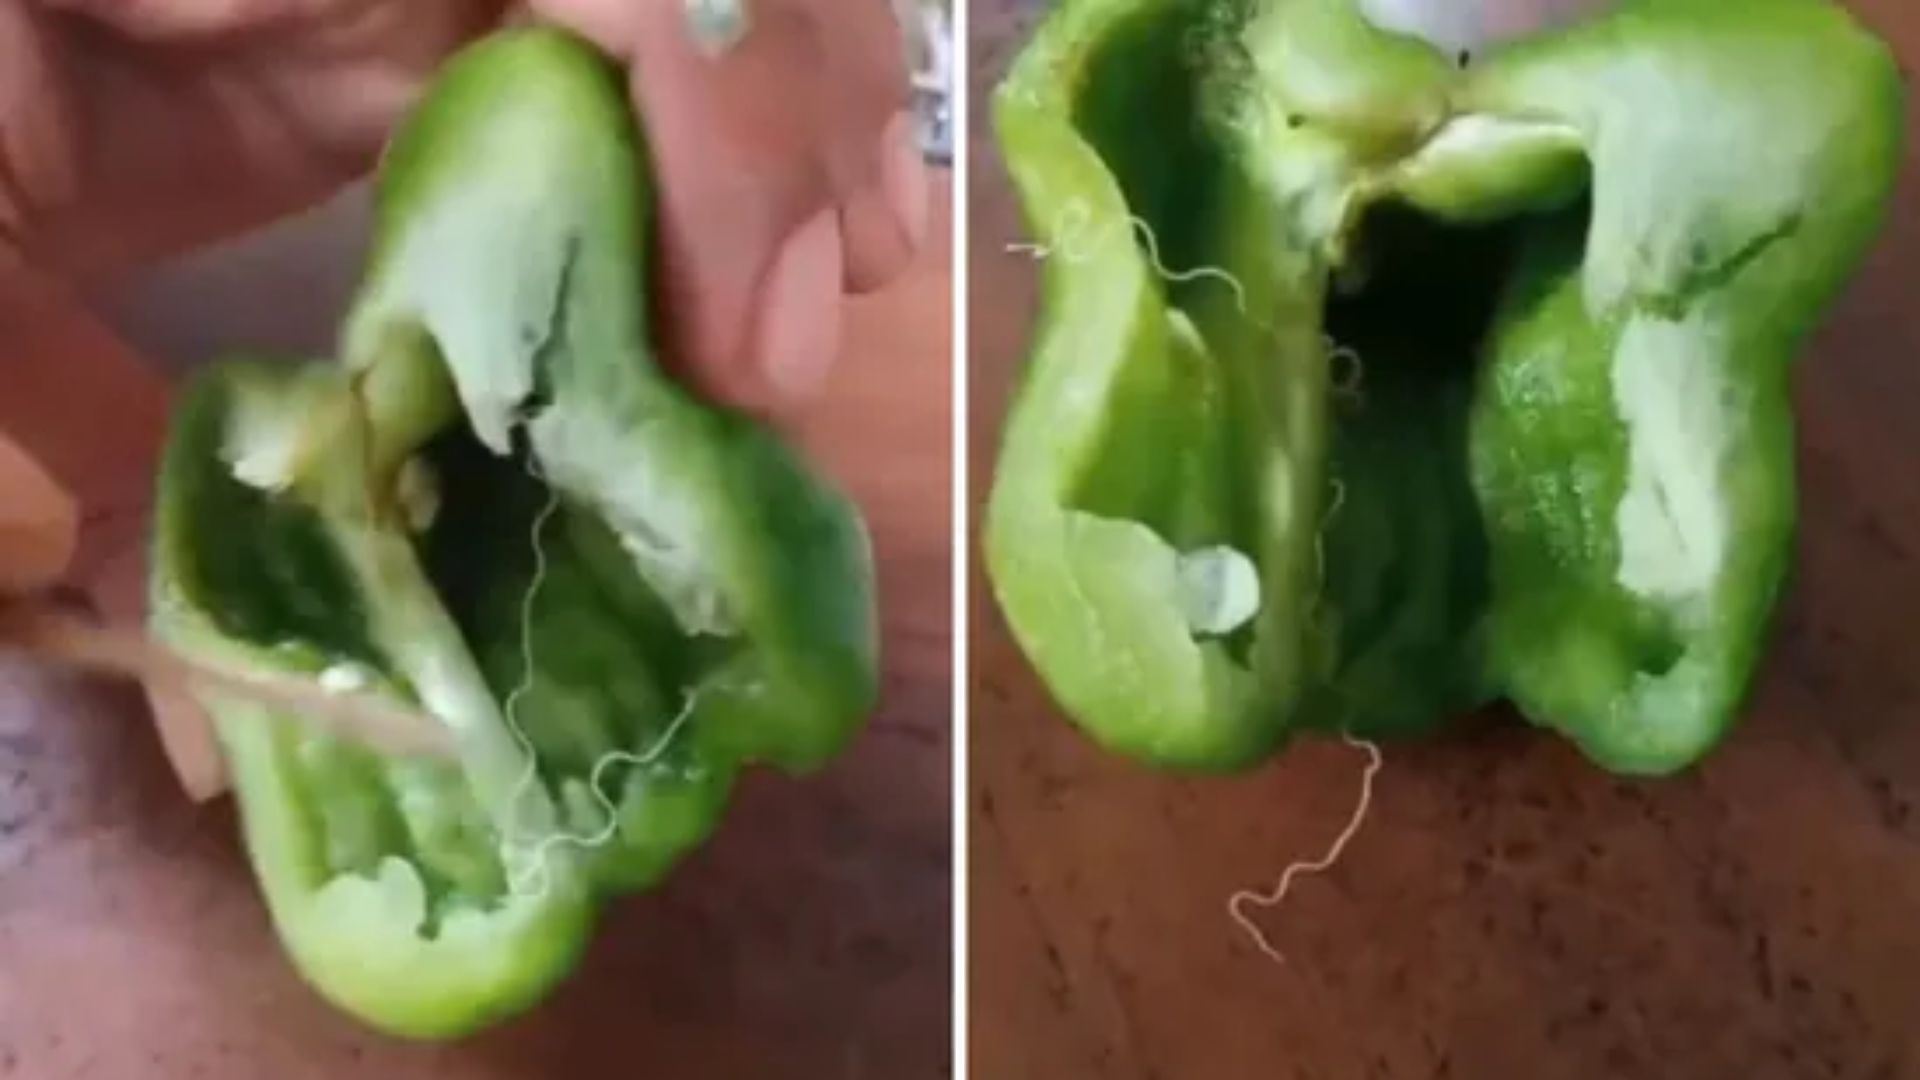 Viral Video Of ‘Deadly Worm’ In Capsicum Debunked As Misleading